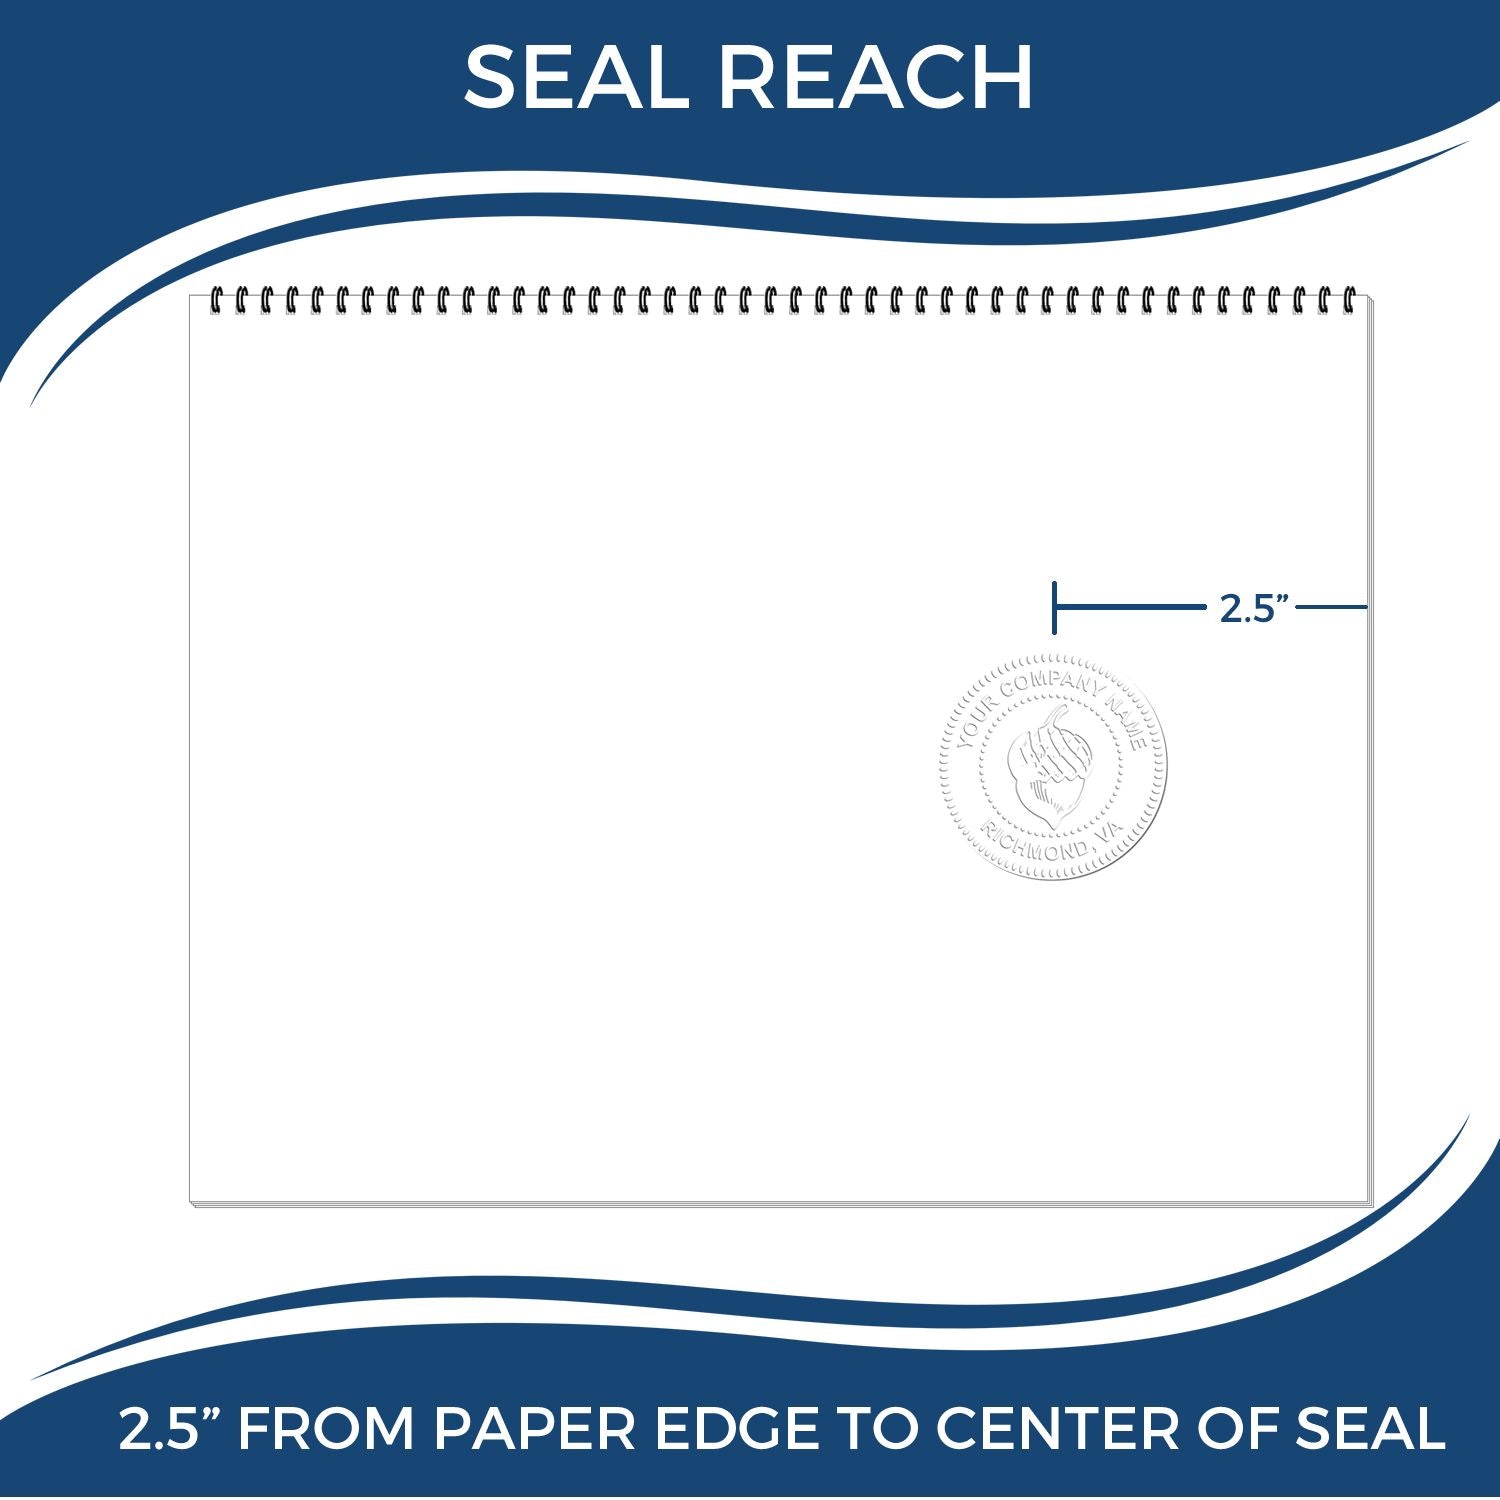 An infographic showing the seal reach which is represented by a ruler and a miniature seal image of the Heavy Duty Cast Iron Connecticut Geologist Seal Embosser